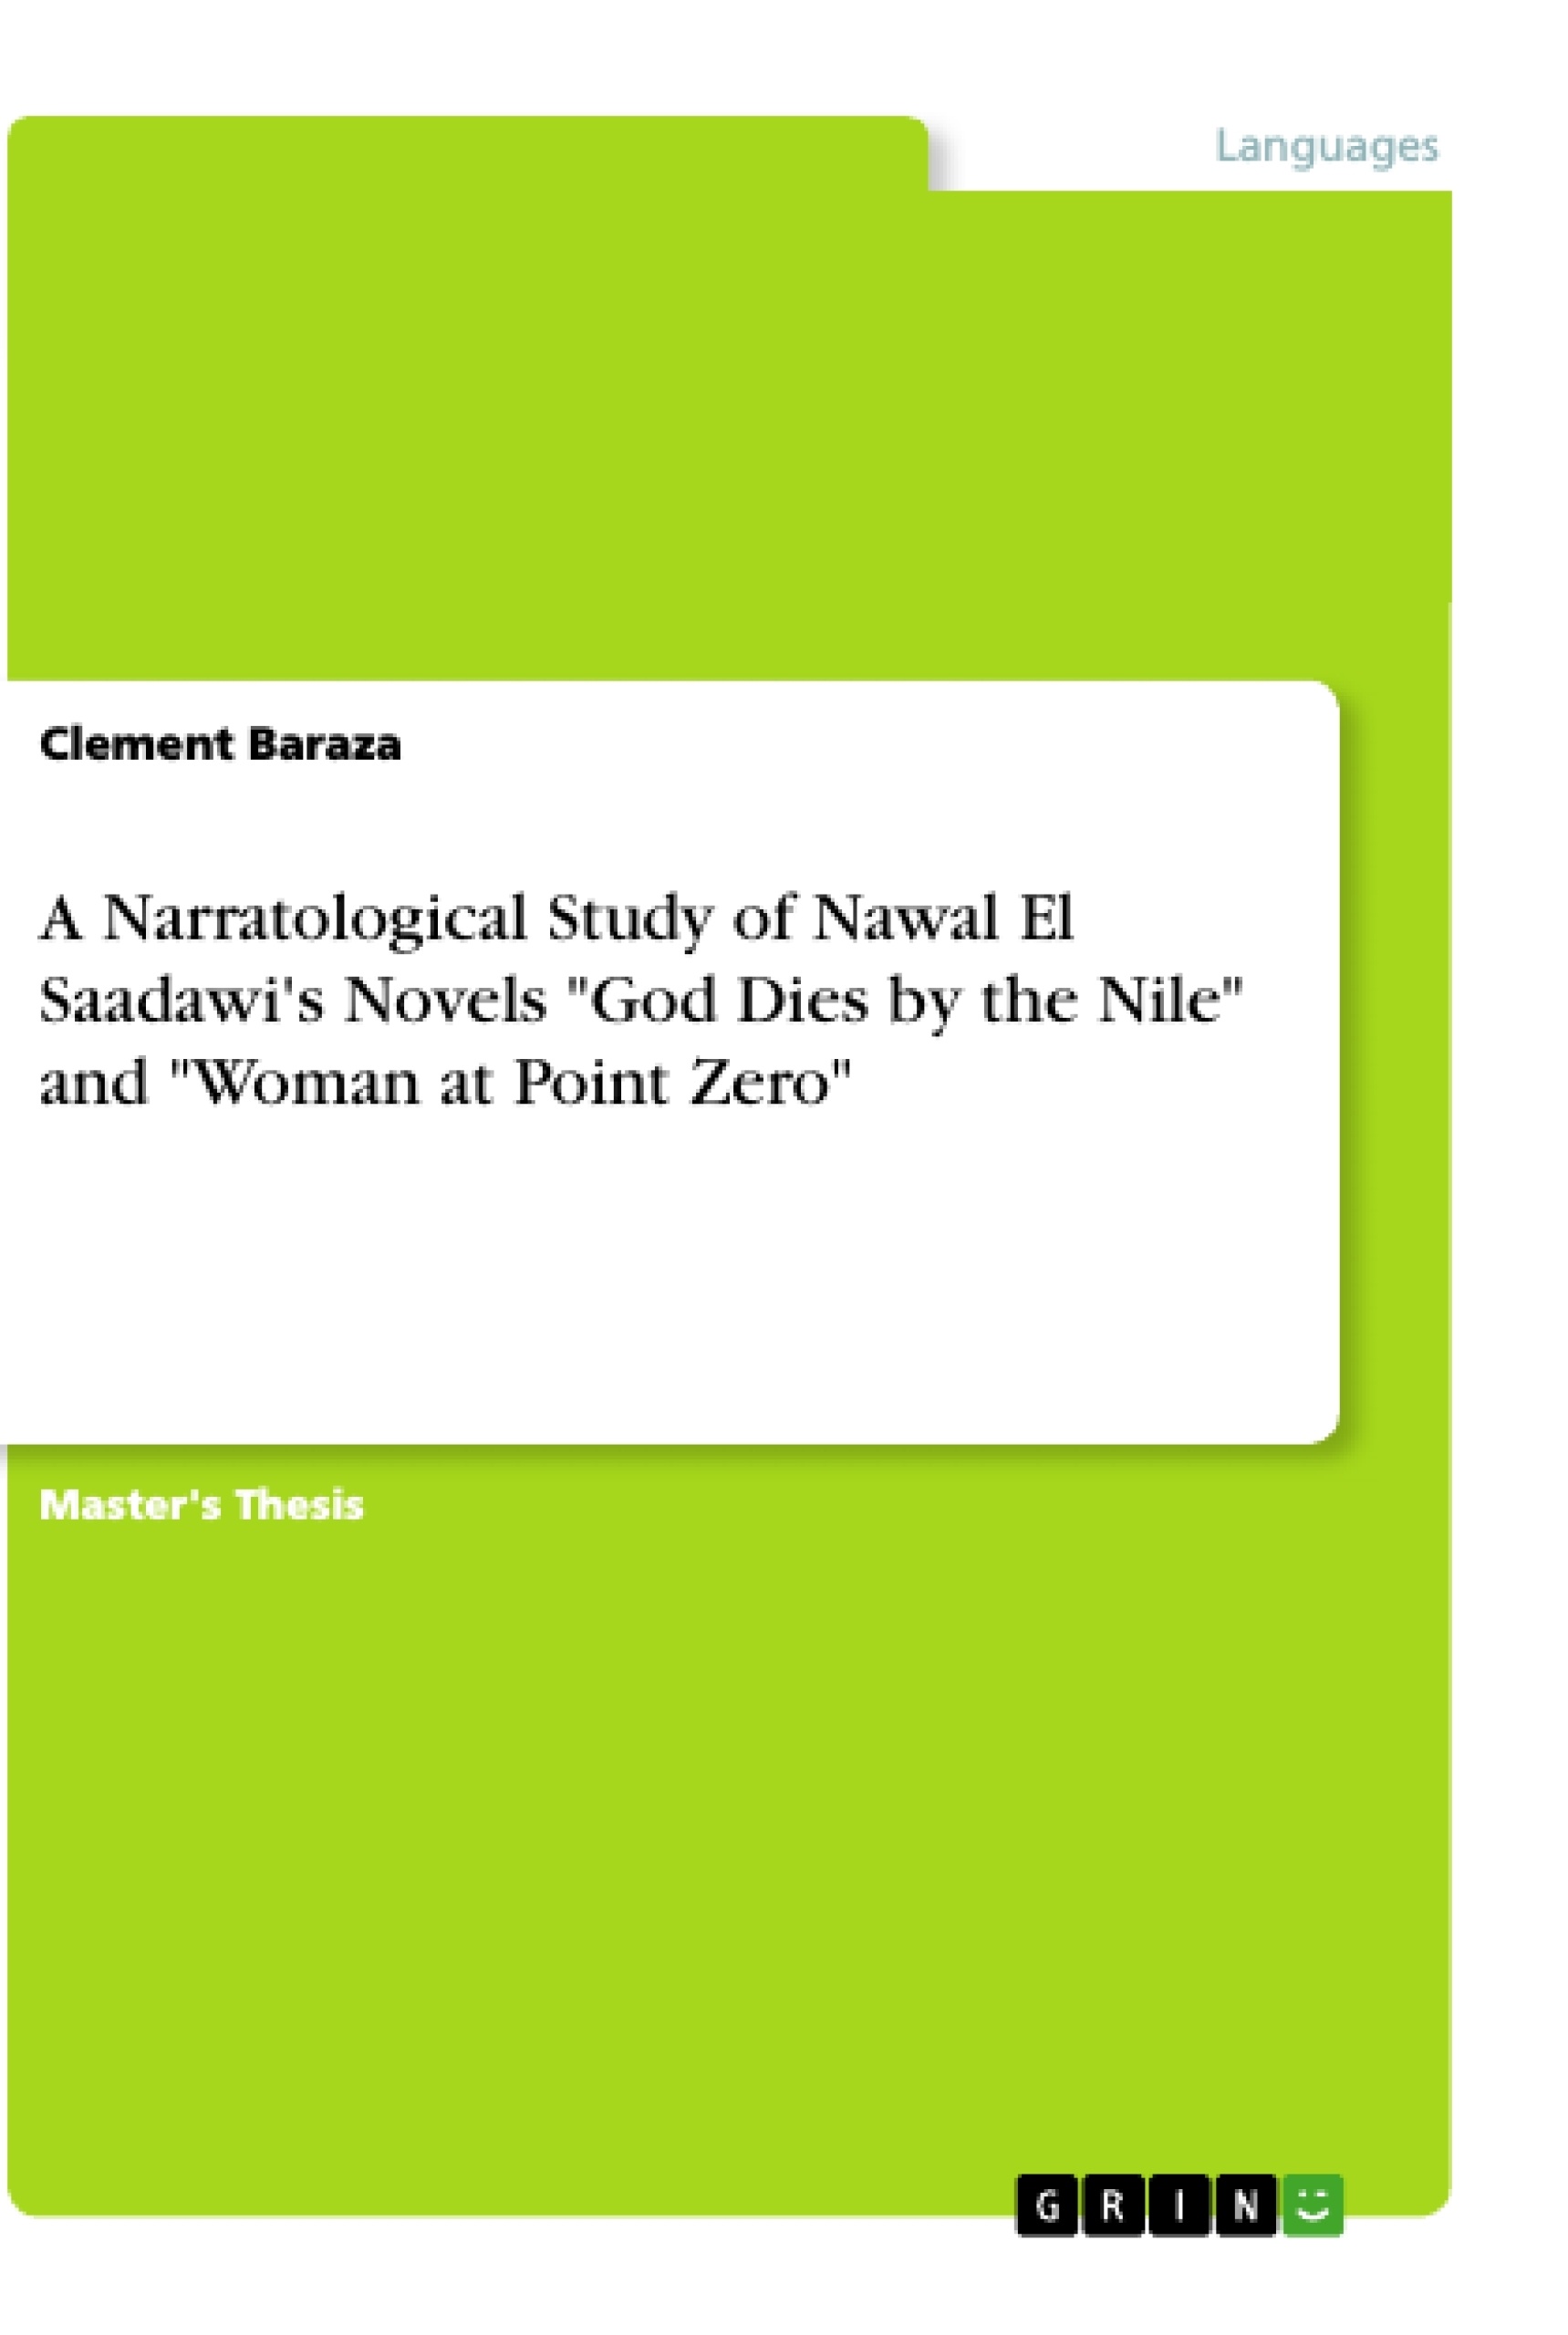 Title: A Narratological Study of Nawal El Saadawi's Novels "God Dies by the Nile" and "Woman at Point Zero"